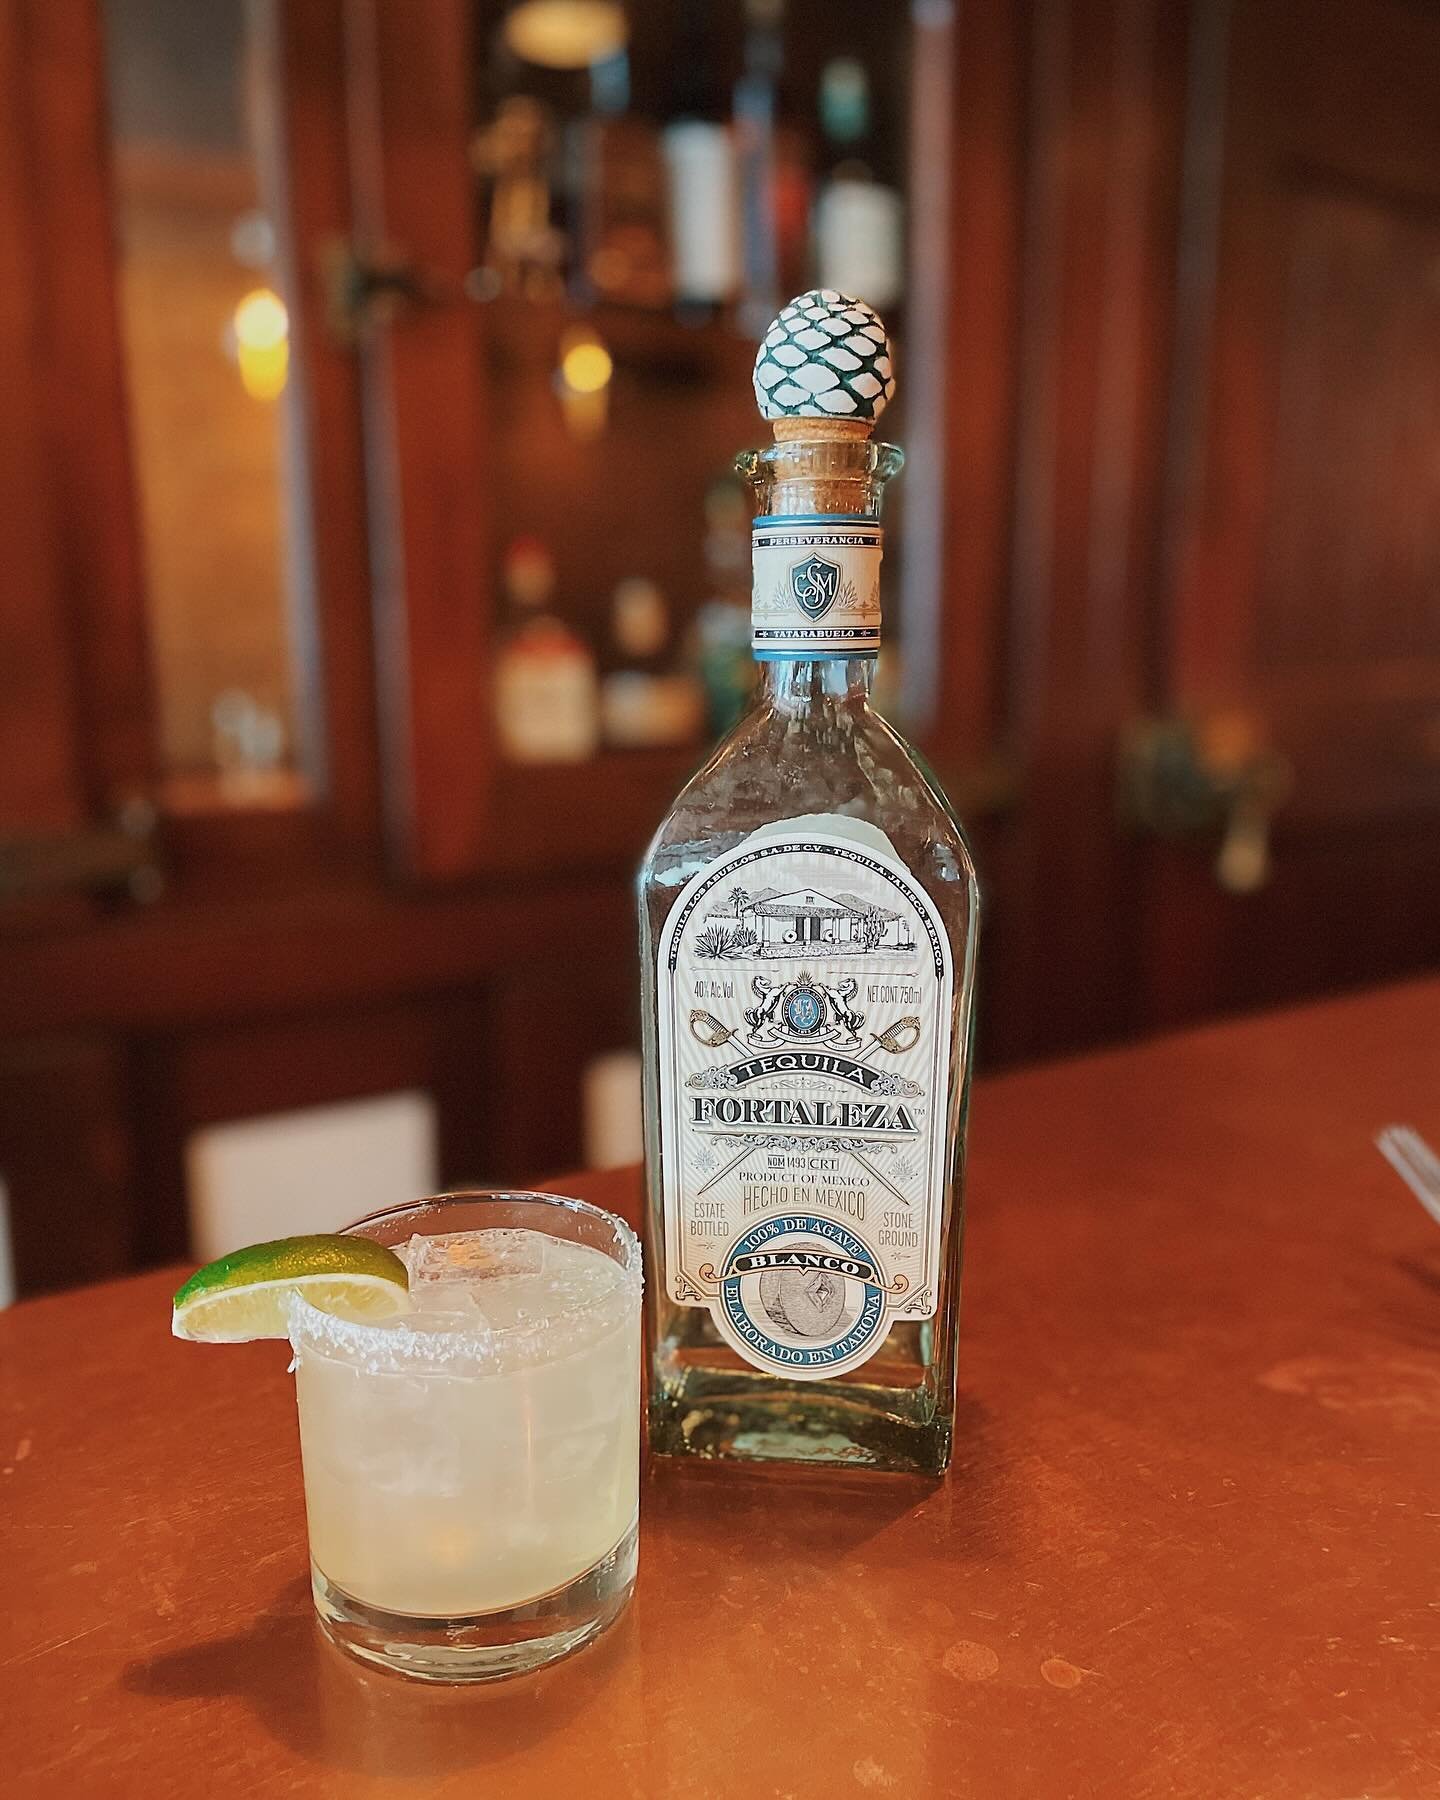 Come get a $14 Margarita made with the highly coveted (and highly delicious) Fortaleza Tequila during Happy Hour! Monday, Wednesday, Thursday, Sunday 3:30-4:30pm 🍹We&rsquo;re also slinging a la carte beignets and lots of other drink specials! You kn